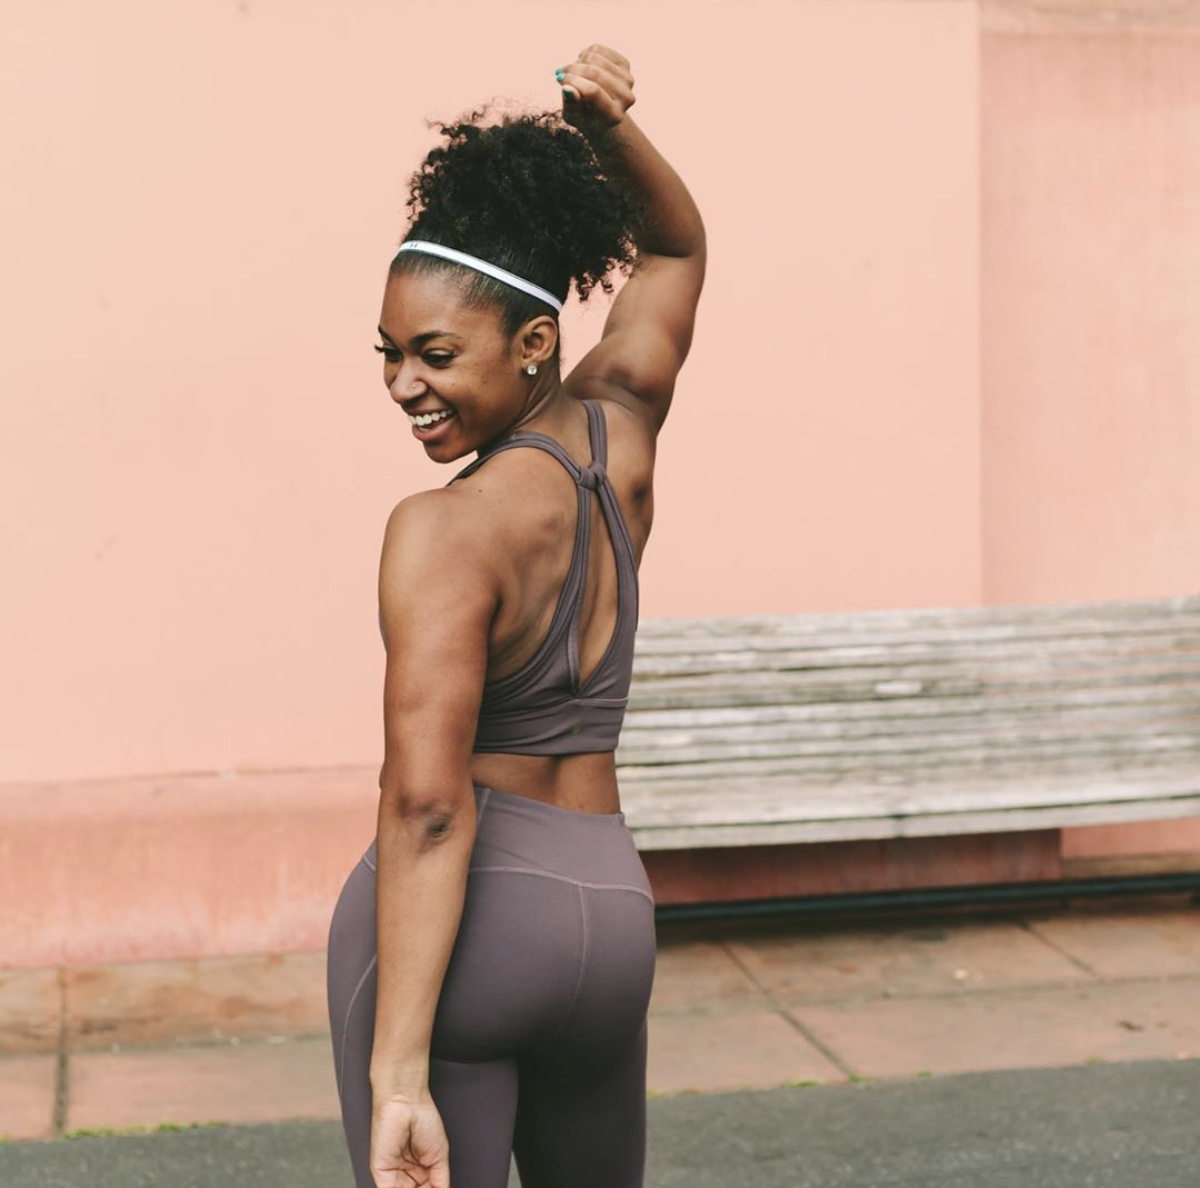 Black Girl Workouts  Equipment, Plans, and Online Fitness Training